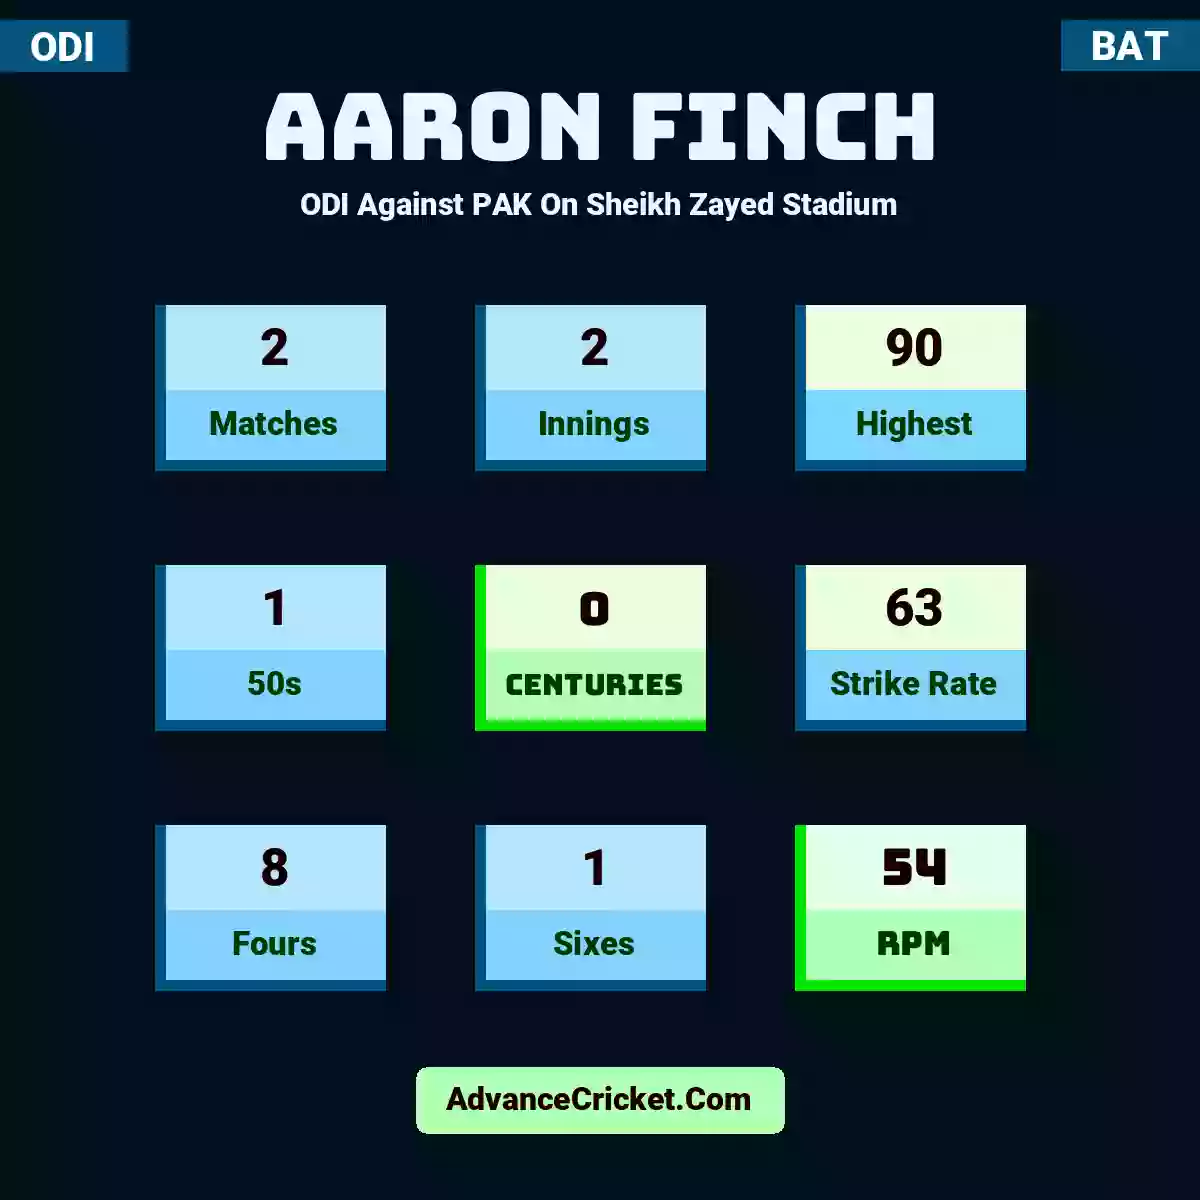 Aaron Finch ODI  Against PAK On Sheikh Zayed Stadium, Aaron Finch played 2 matches, scored 90 runs as highest, 1 half-centuries, and 0 centuries, with a strike rate of 63. A.Finch hit 8 fours and 1 sixes, with an RPM of 54.